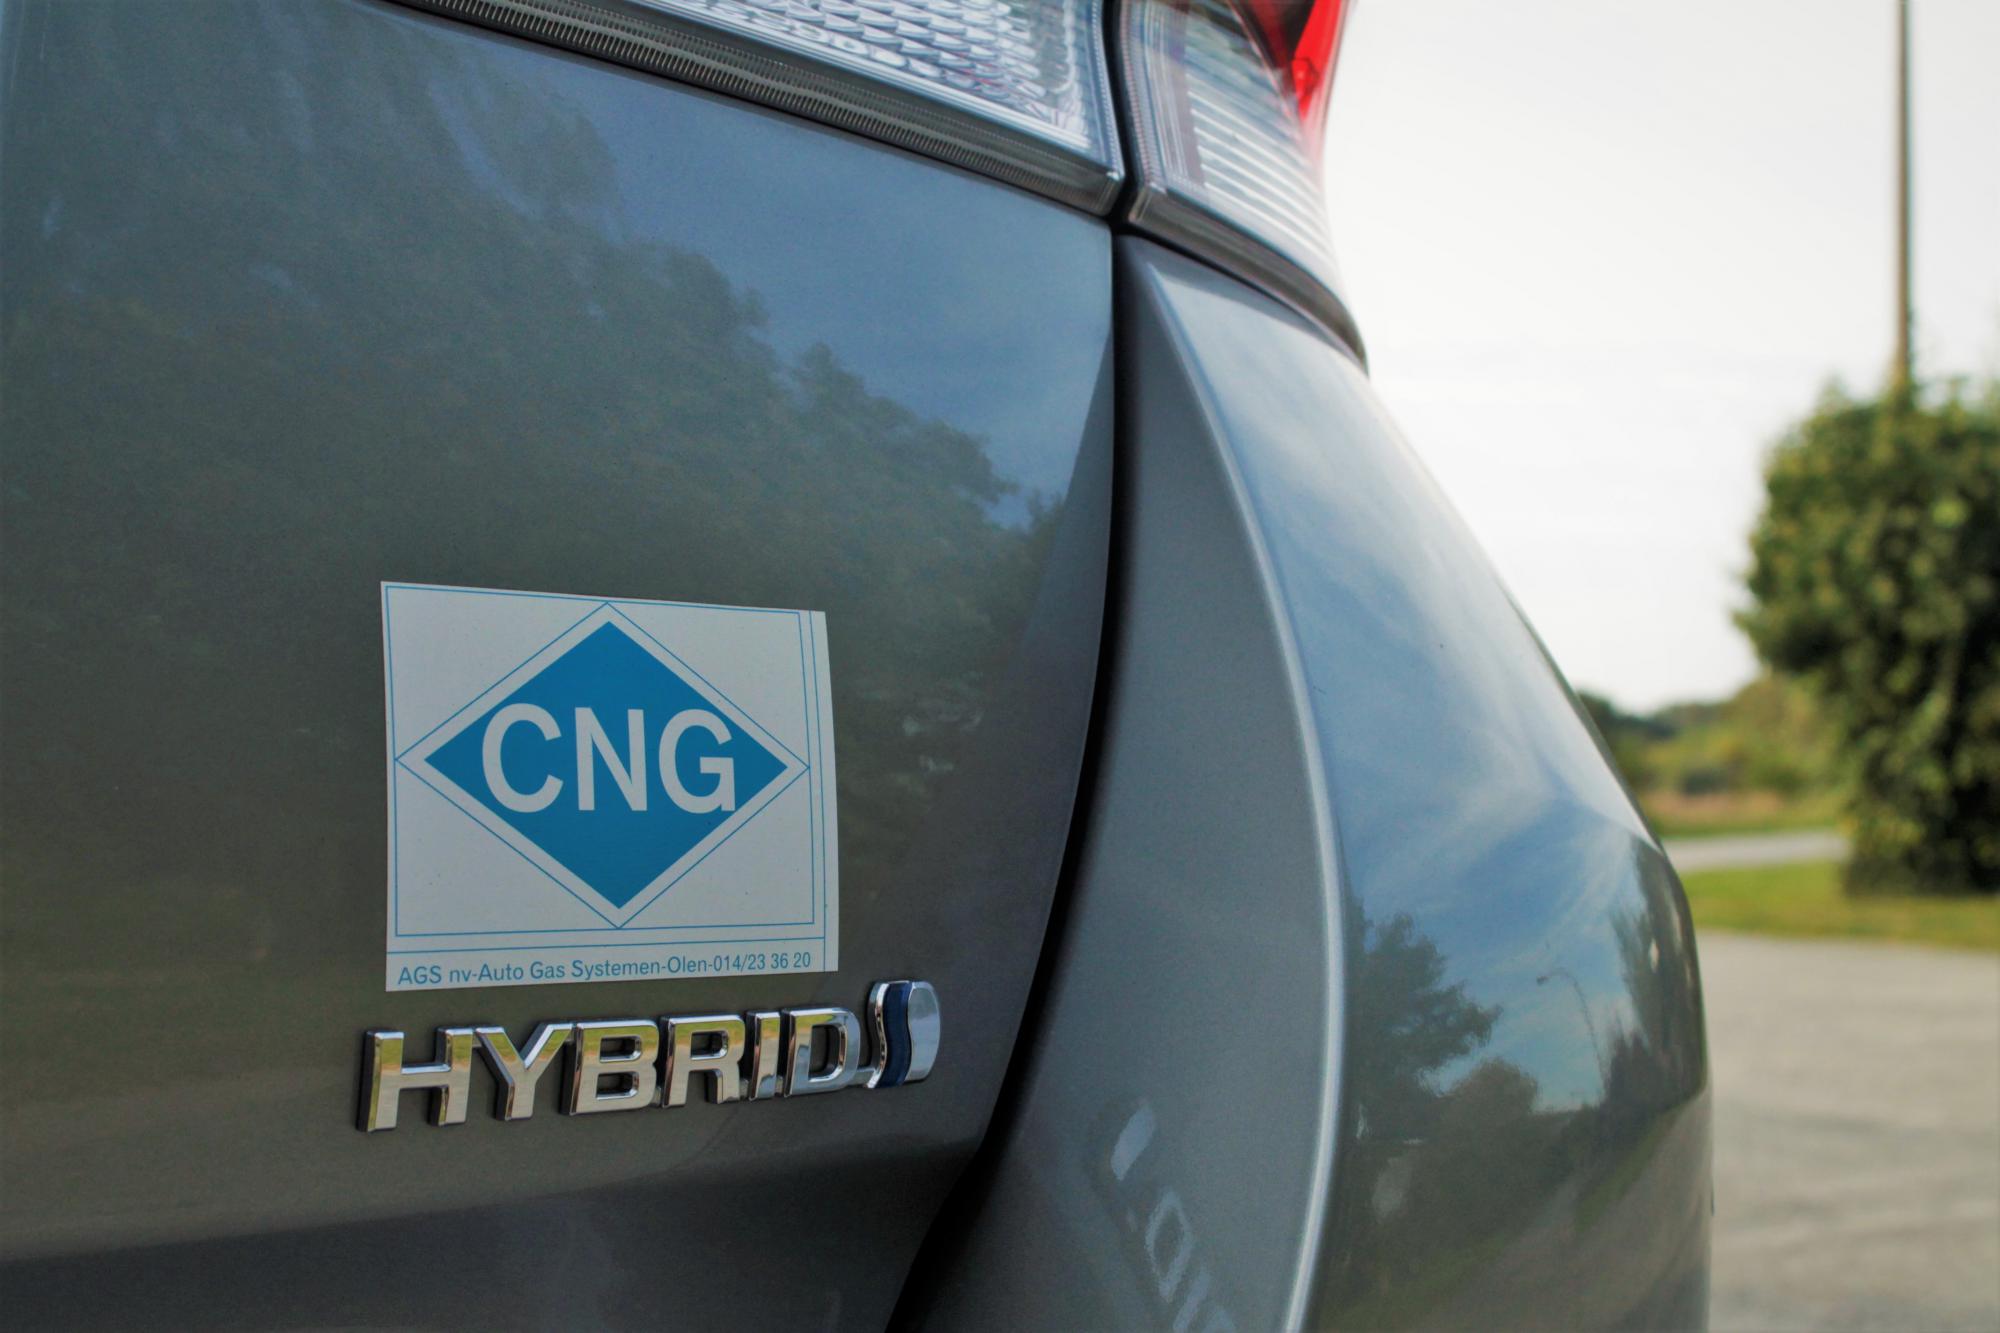 Cng Auto Meaning